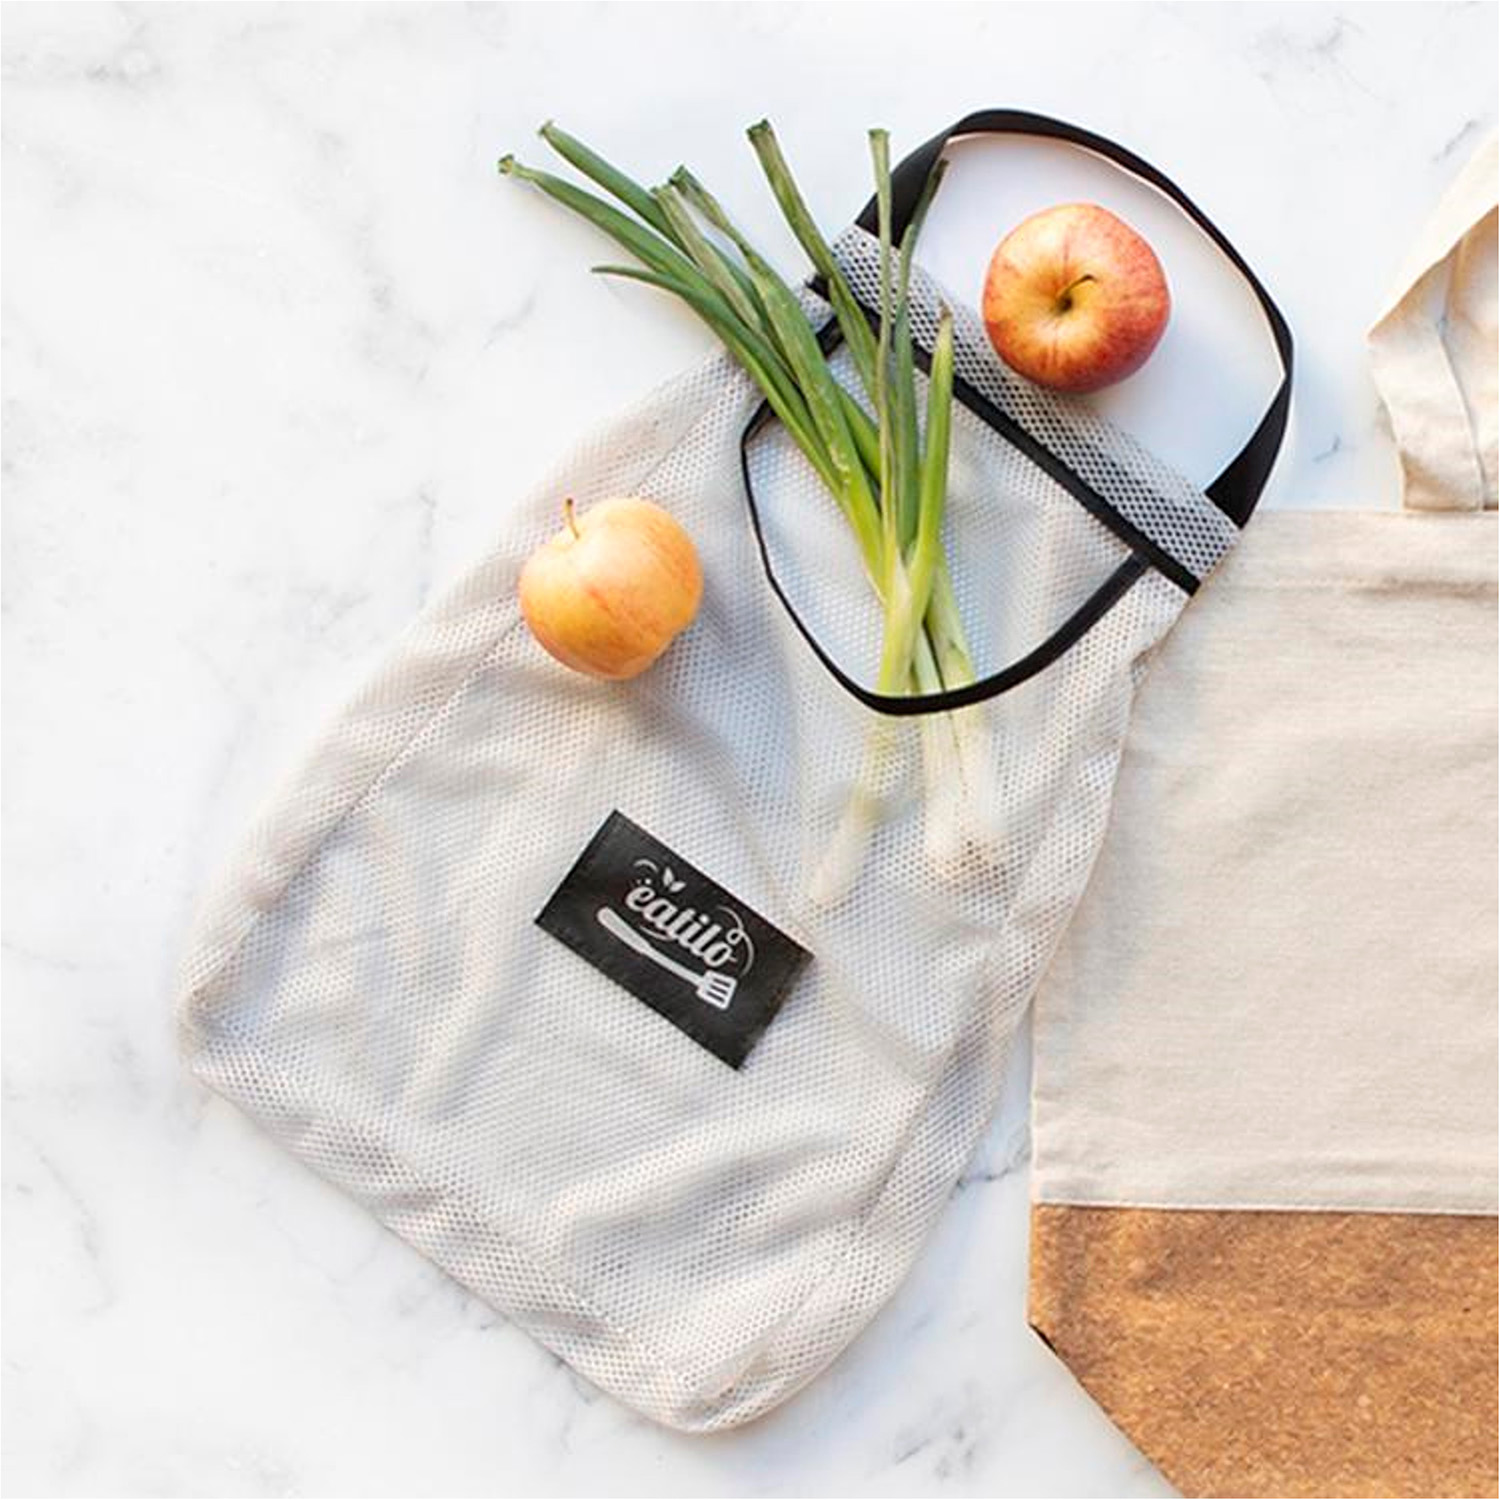 Recycled Produce Mesh Tote Bag | Reusable